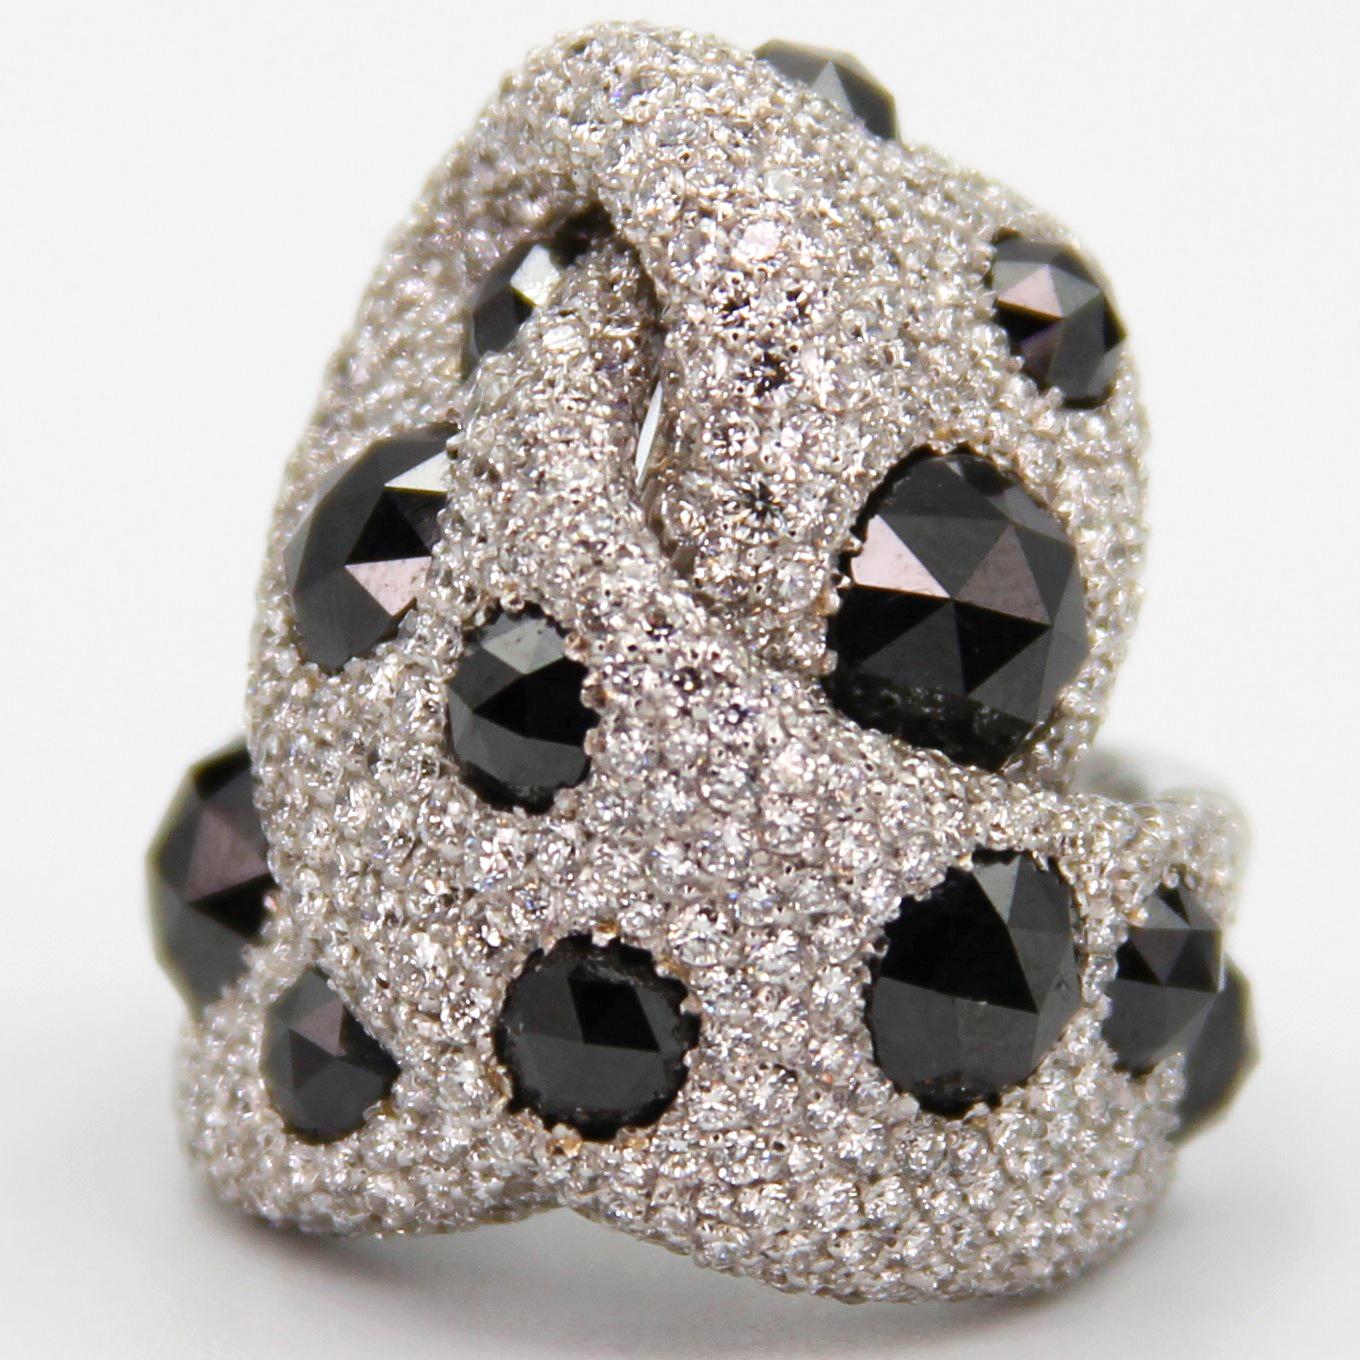 This Italian Brand named Palmiero is stareted manufacturing in 1970's . The ring is perfectly designed with natural Black and White diamonds approx. total of 13.41 Carats on white gold .